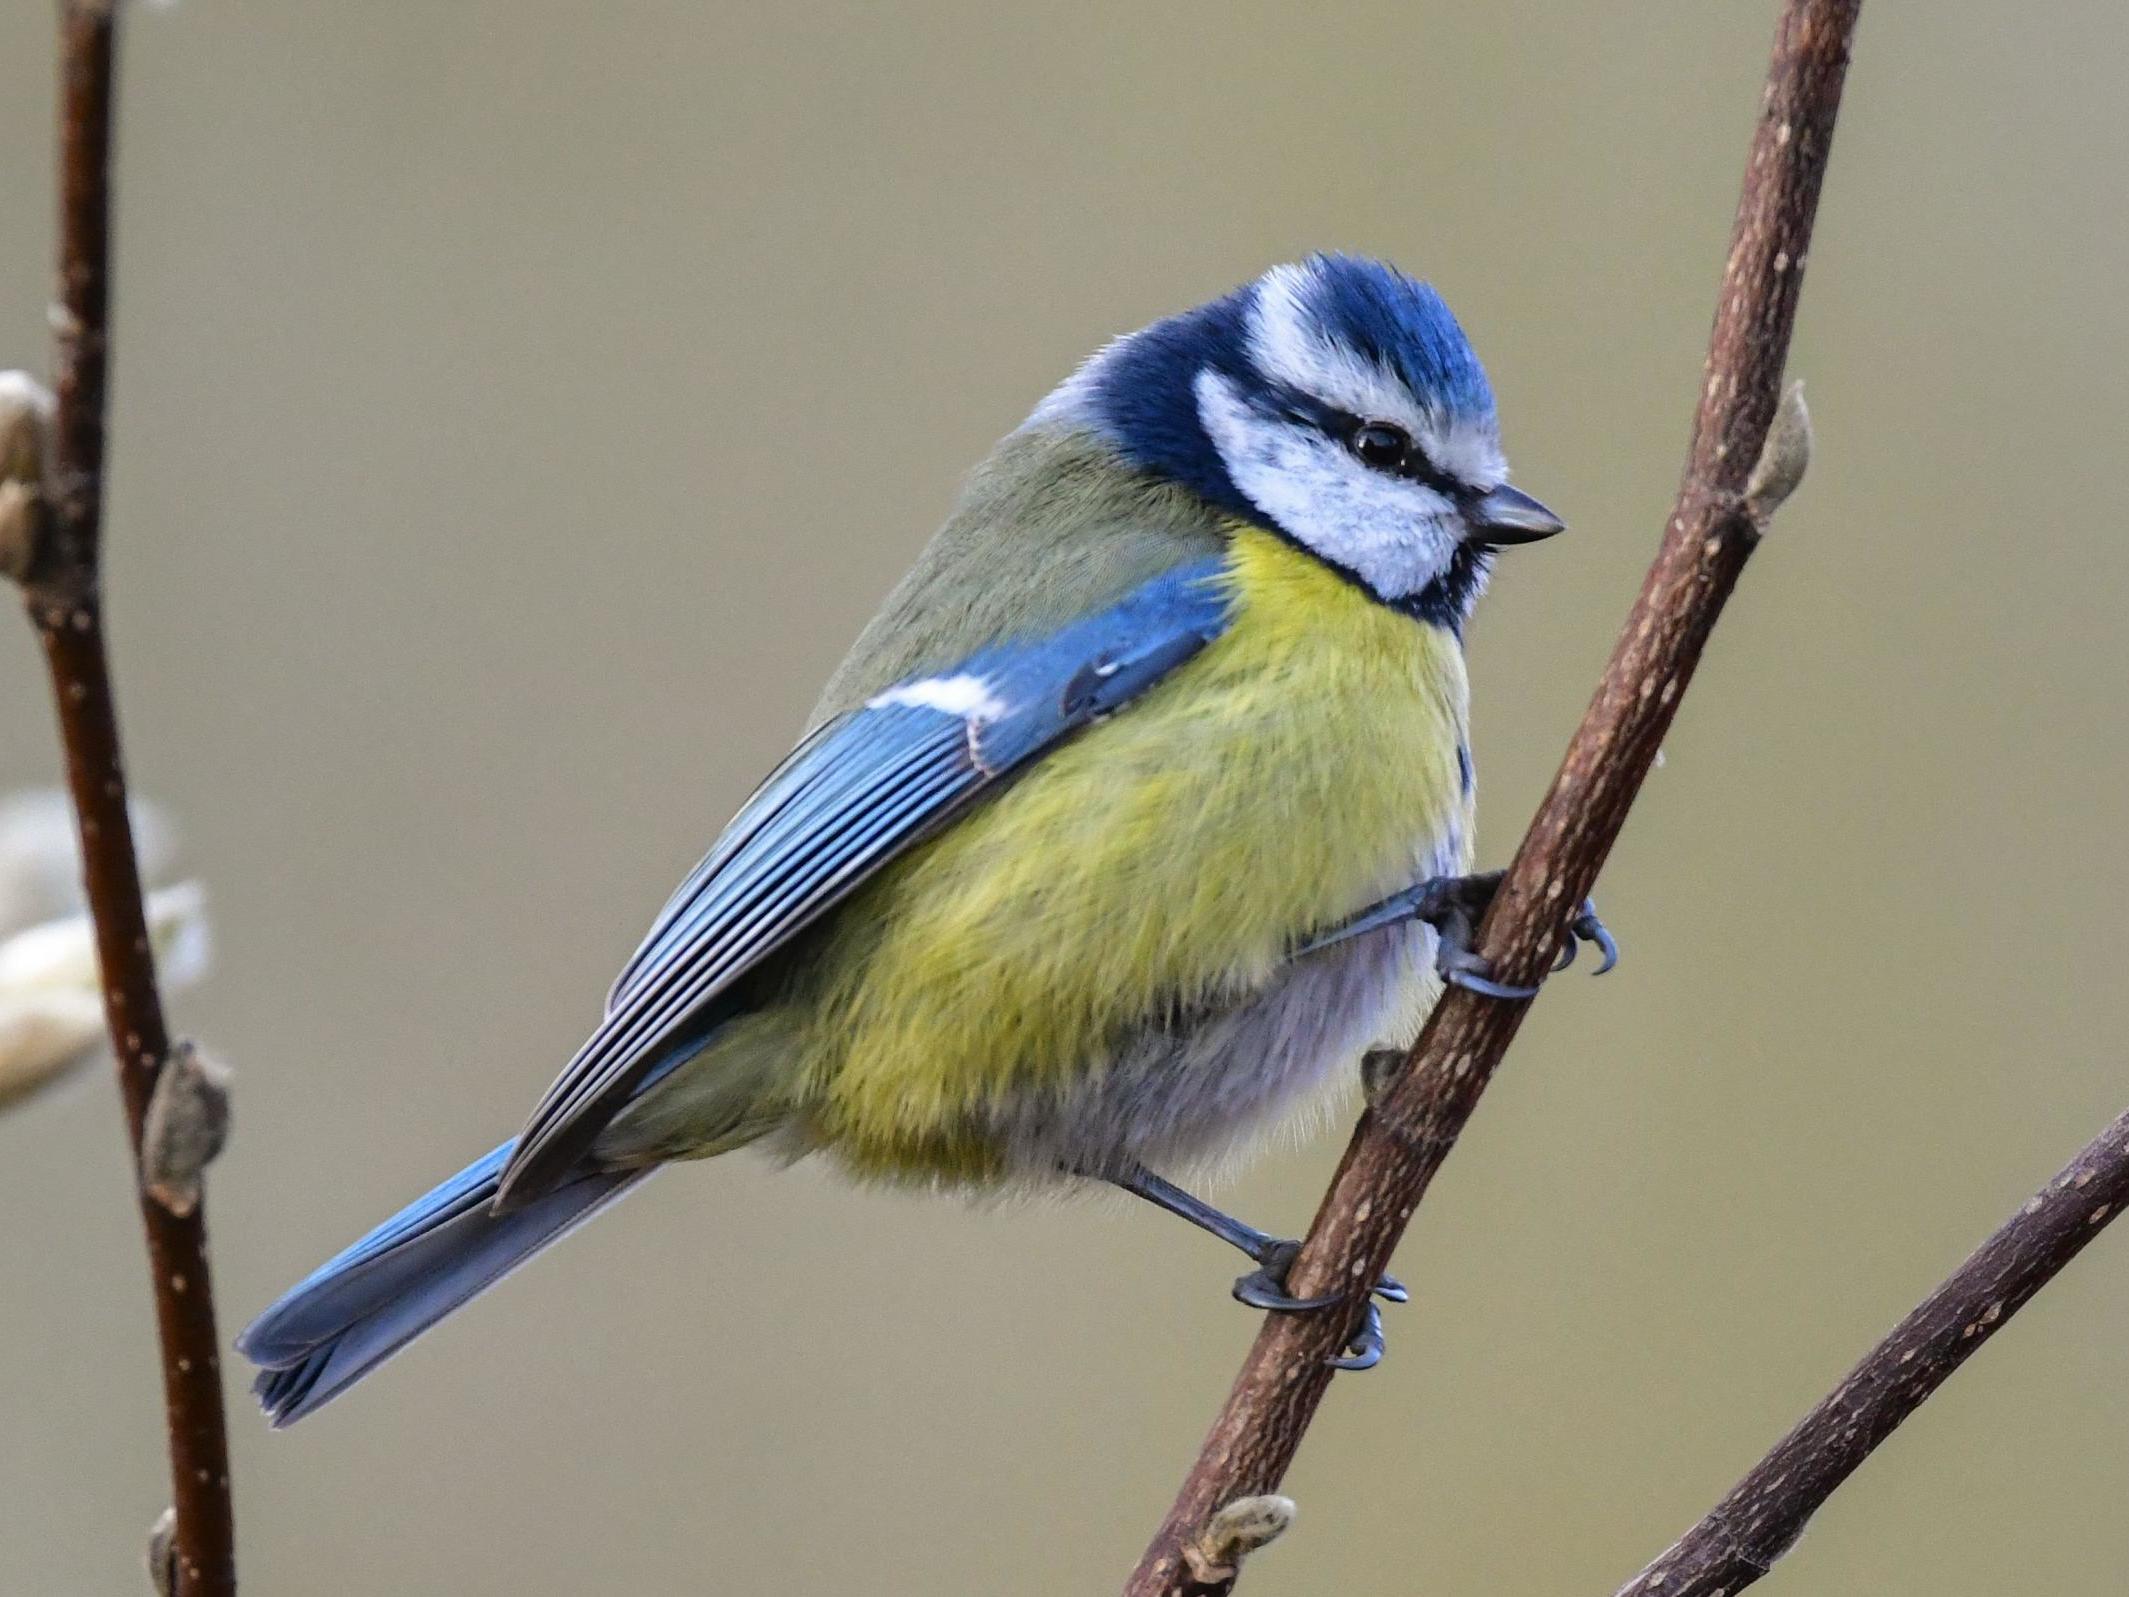 Thousands of blue tits have died in Germany